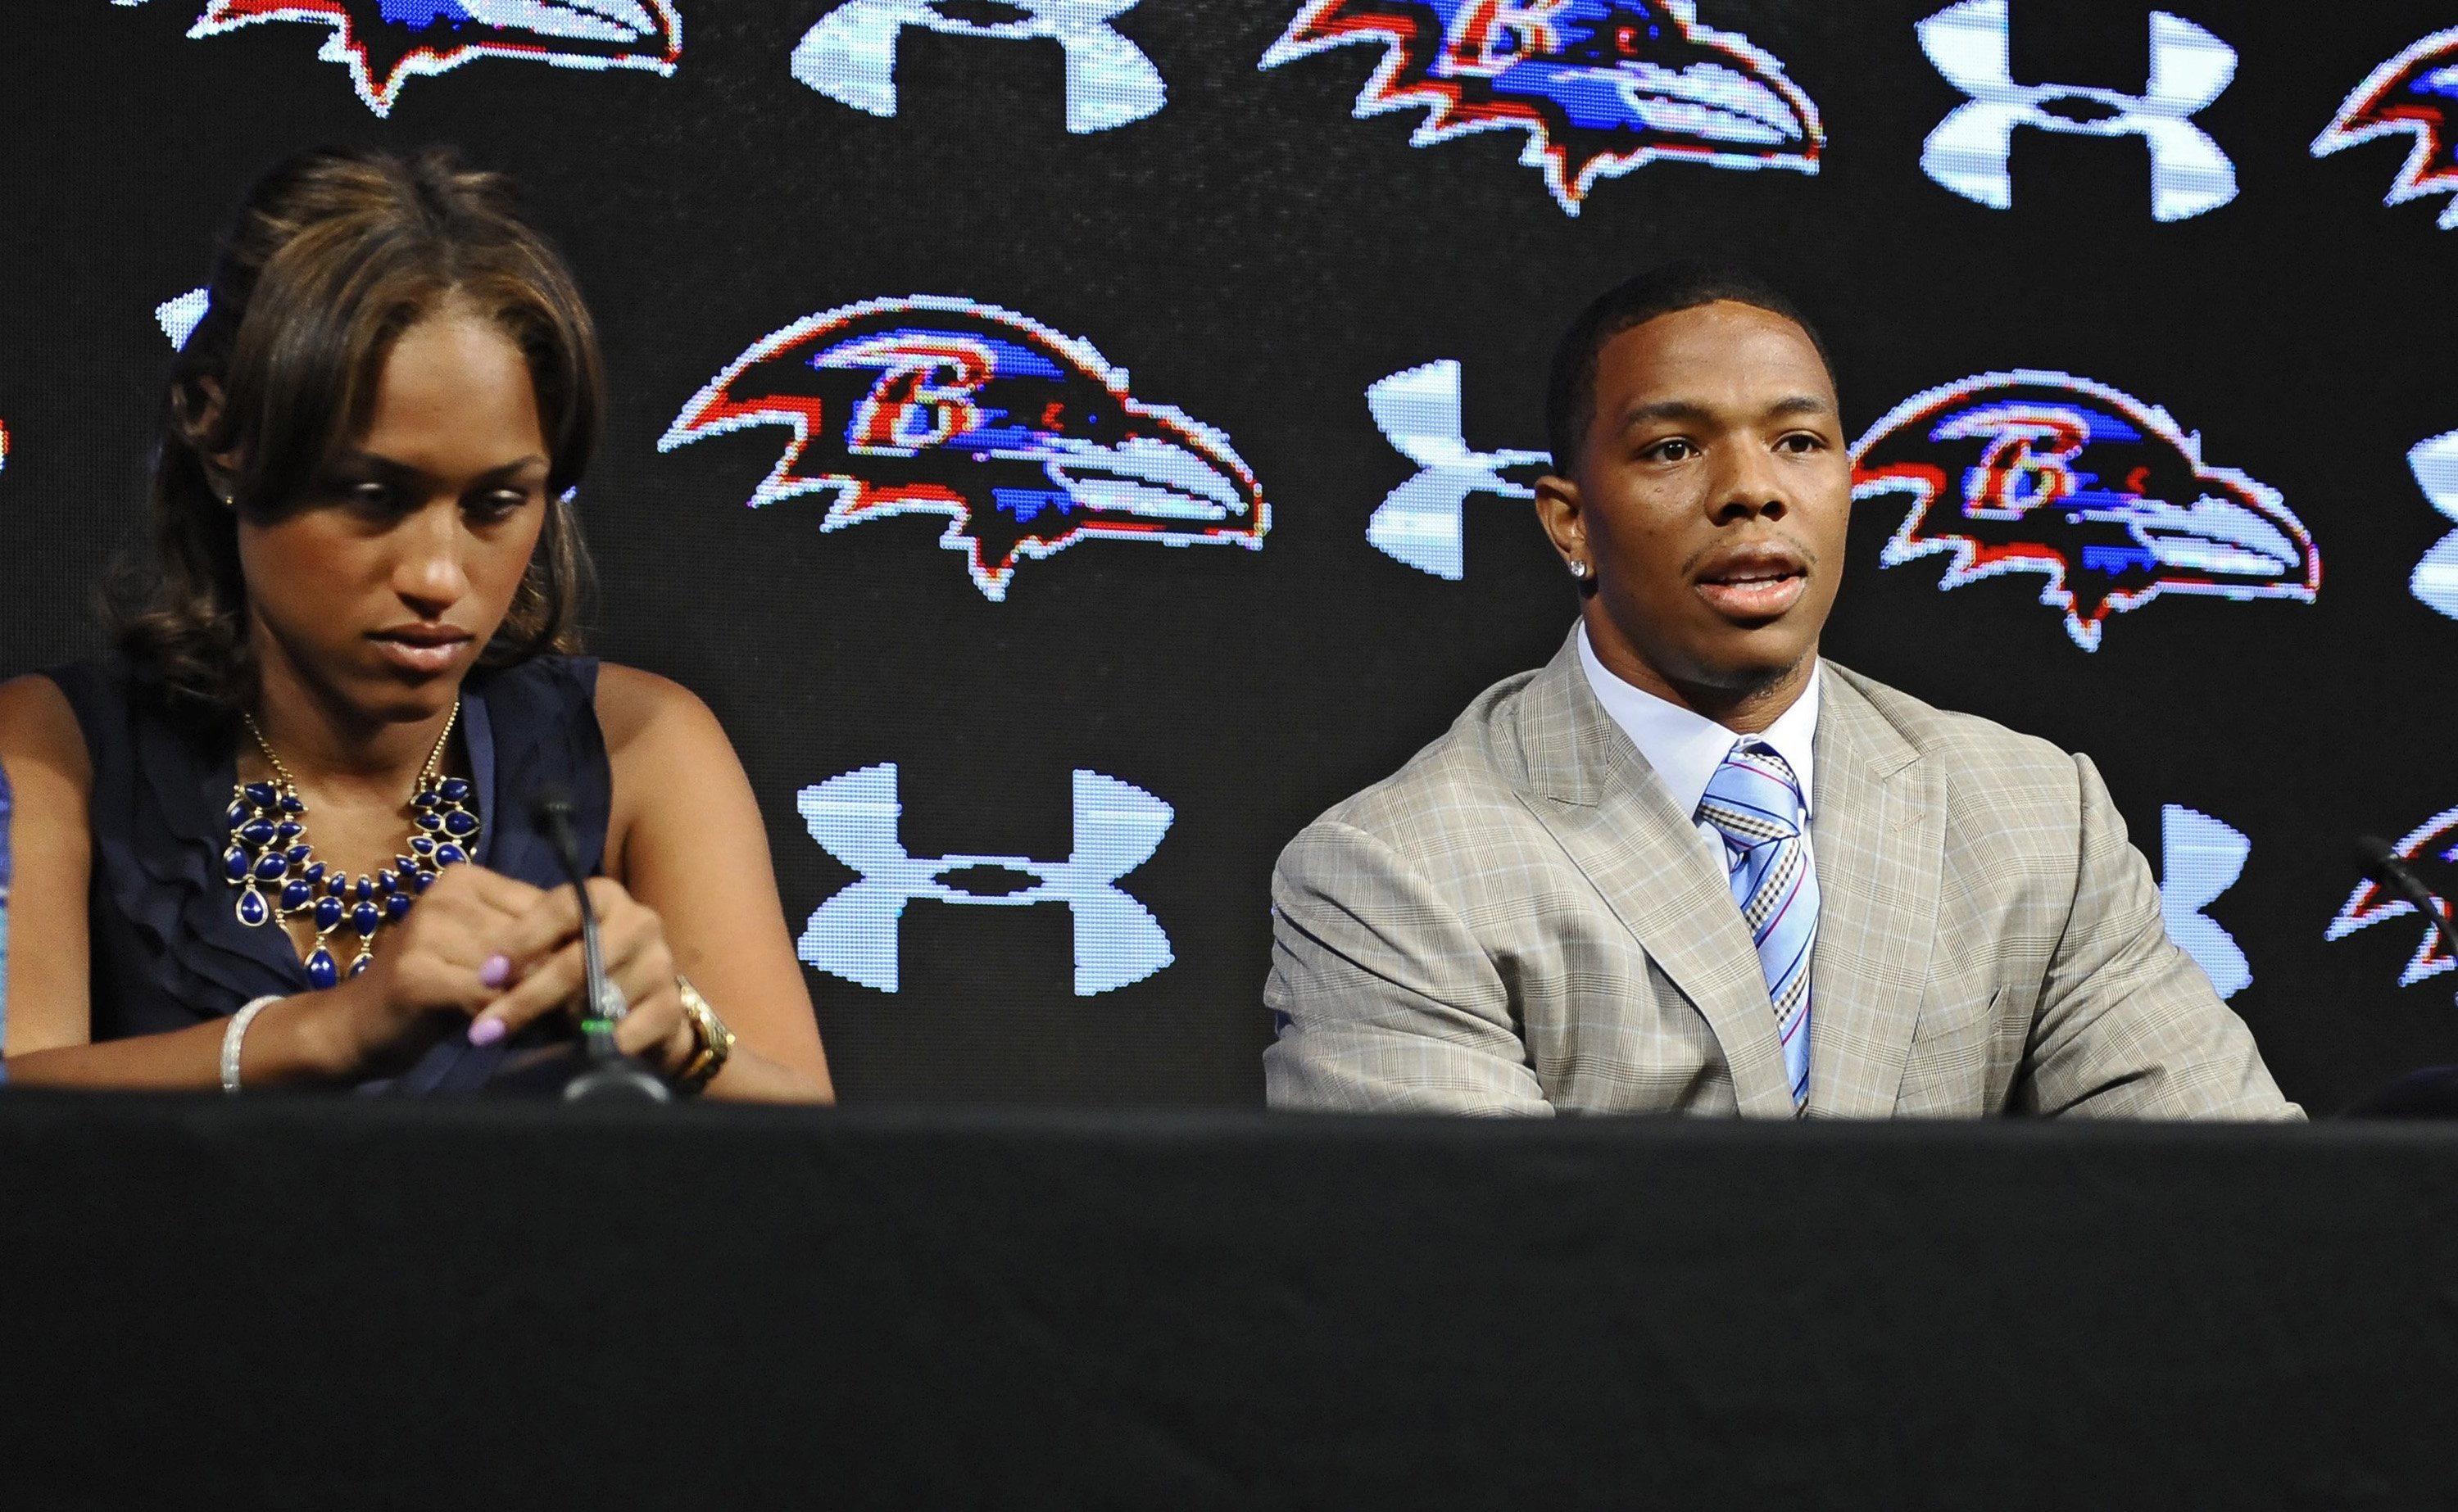 Ravens running back Ray Rice, right, and his wife Janay made statements to the news media May 5, 2014, at the Under Armour Performance Center in Owings Mills, Md, regarding his assault charge for knocking her unconscious in a New Jersey casino. (Baltimore Sun—MCT via Getty Images)